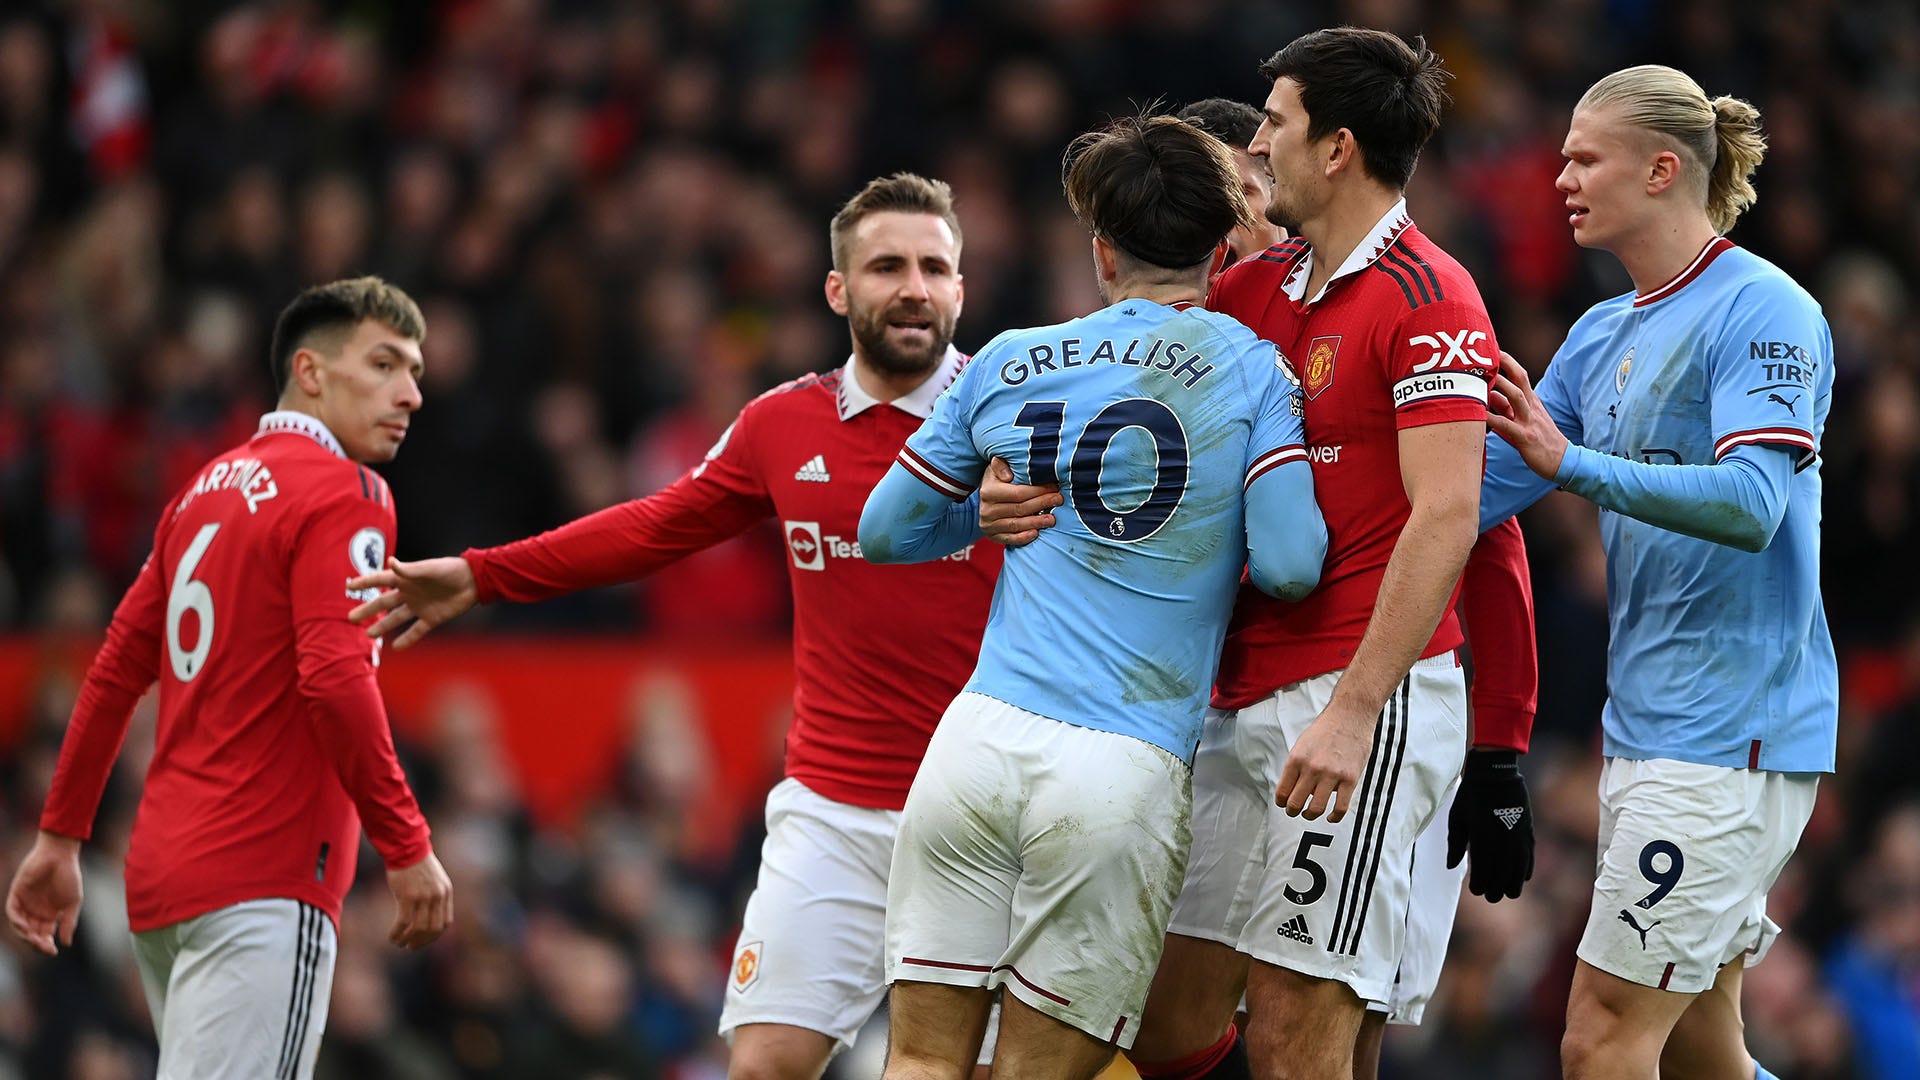  Manchester City players celebrate a goal against Newcastle United during their FA Cup match at Old Trafford.